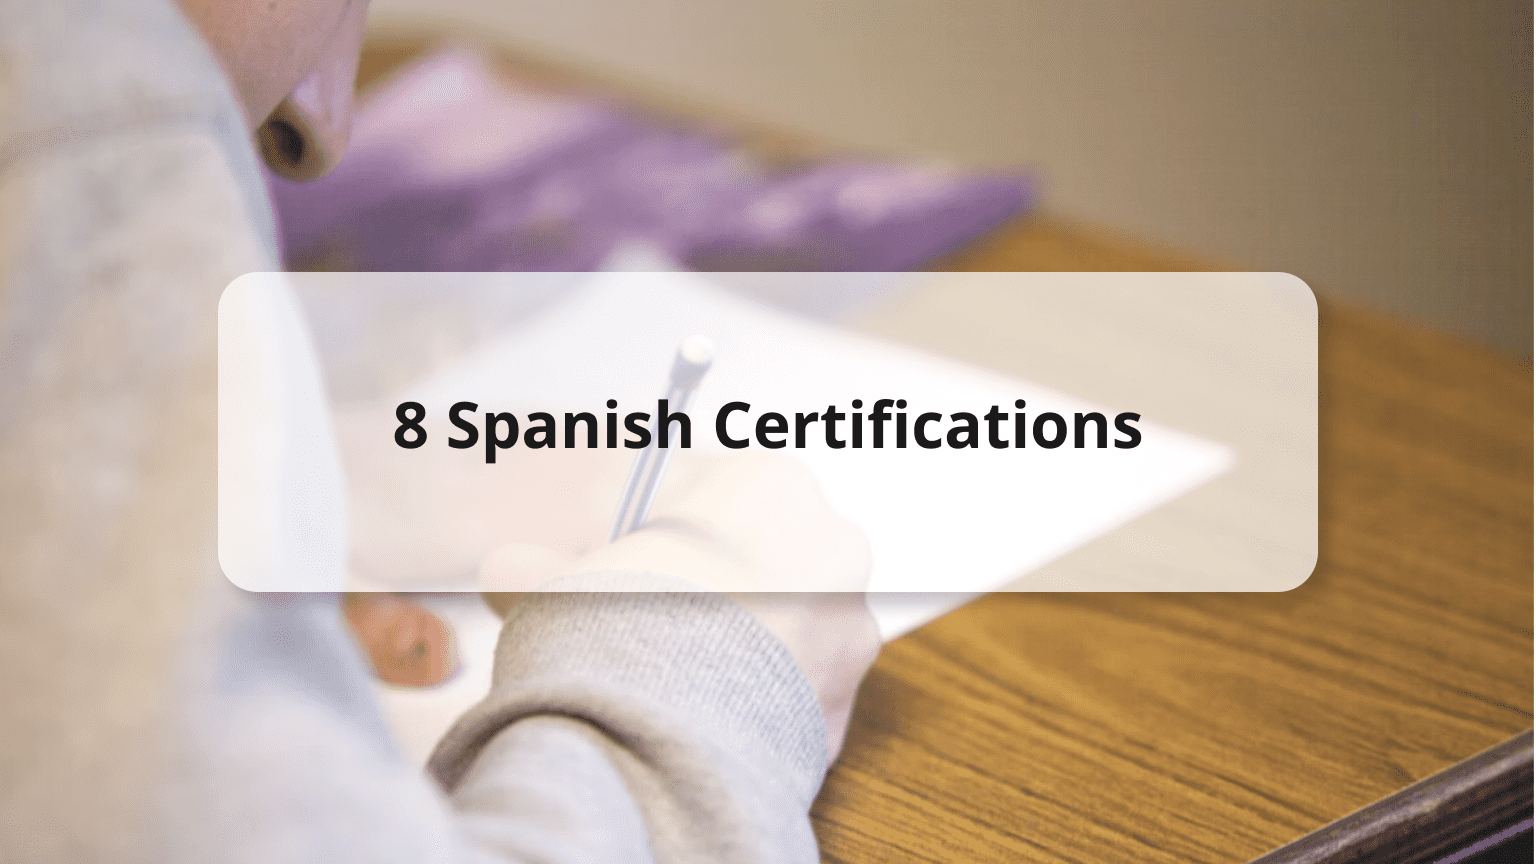 People that have completed the Spanish Course, how fluent are you